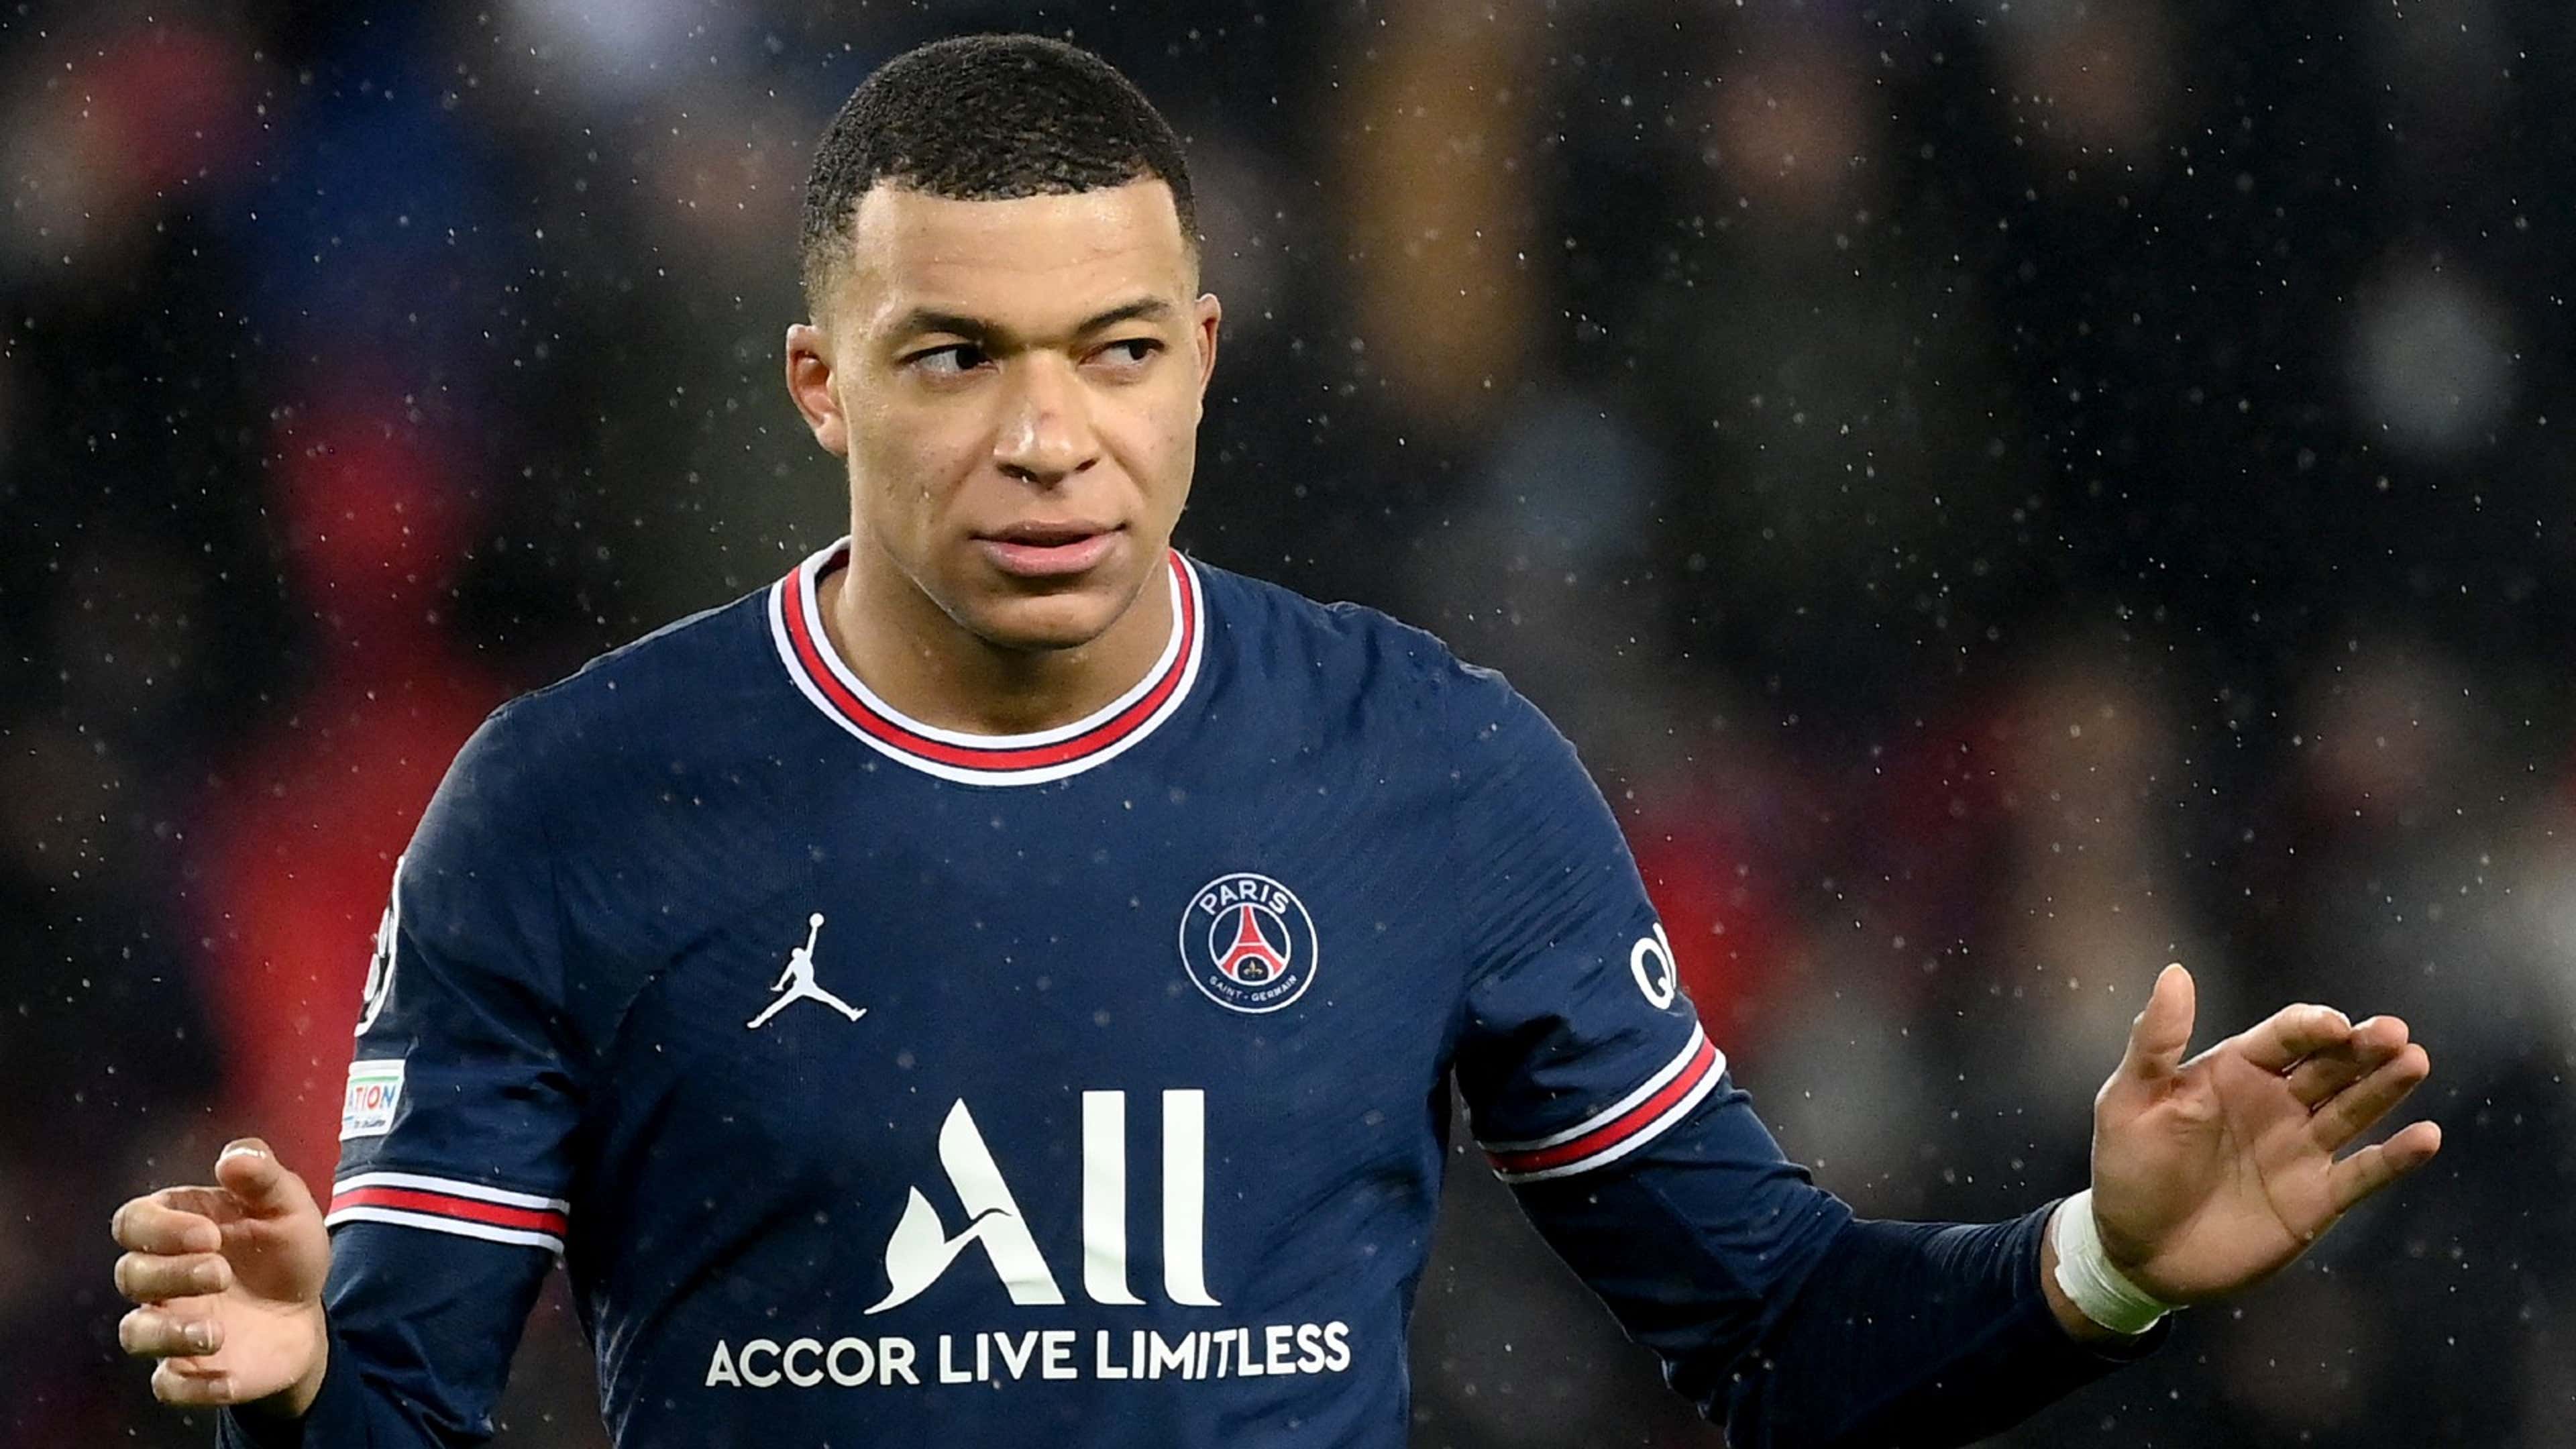 Kylian Mbappe to Real Madrid latest as PSG star talks about his future